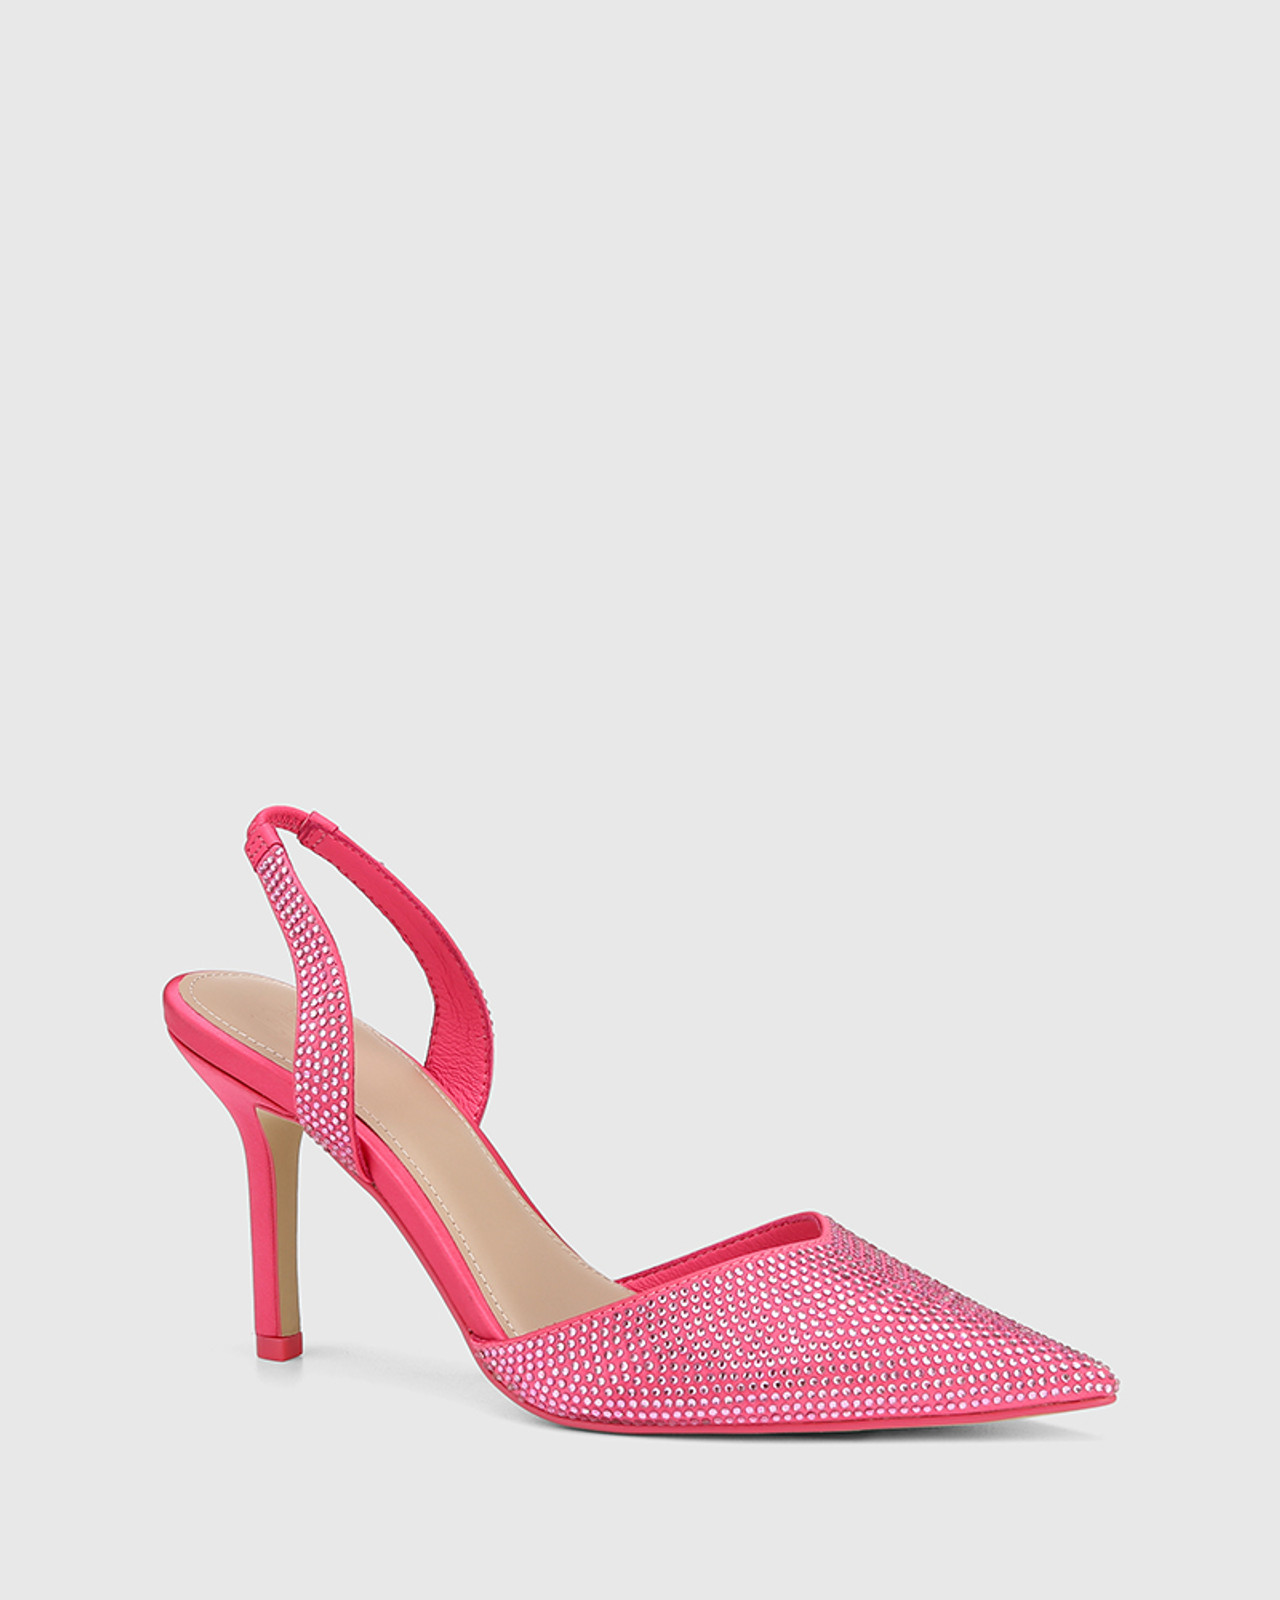 Quannah Hot Pink Recycled Satin Stiletto Heel